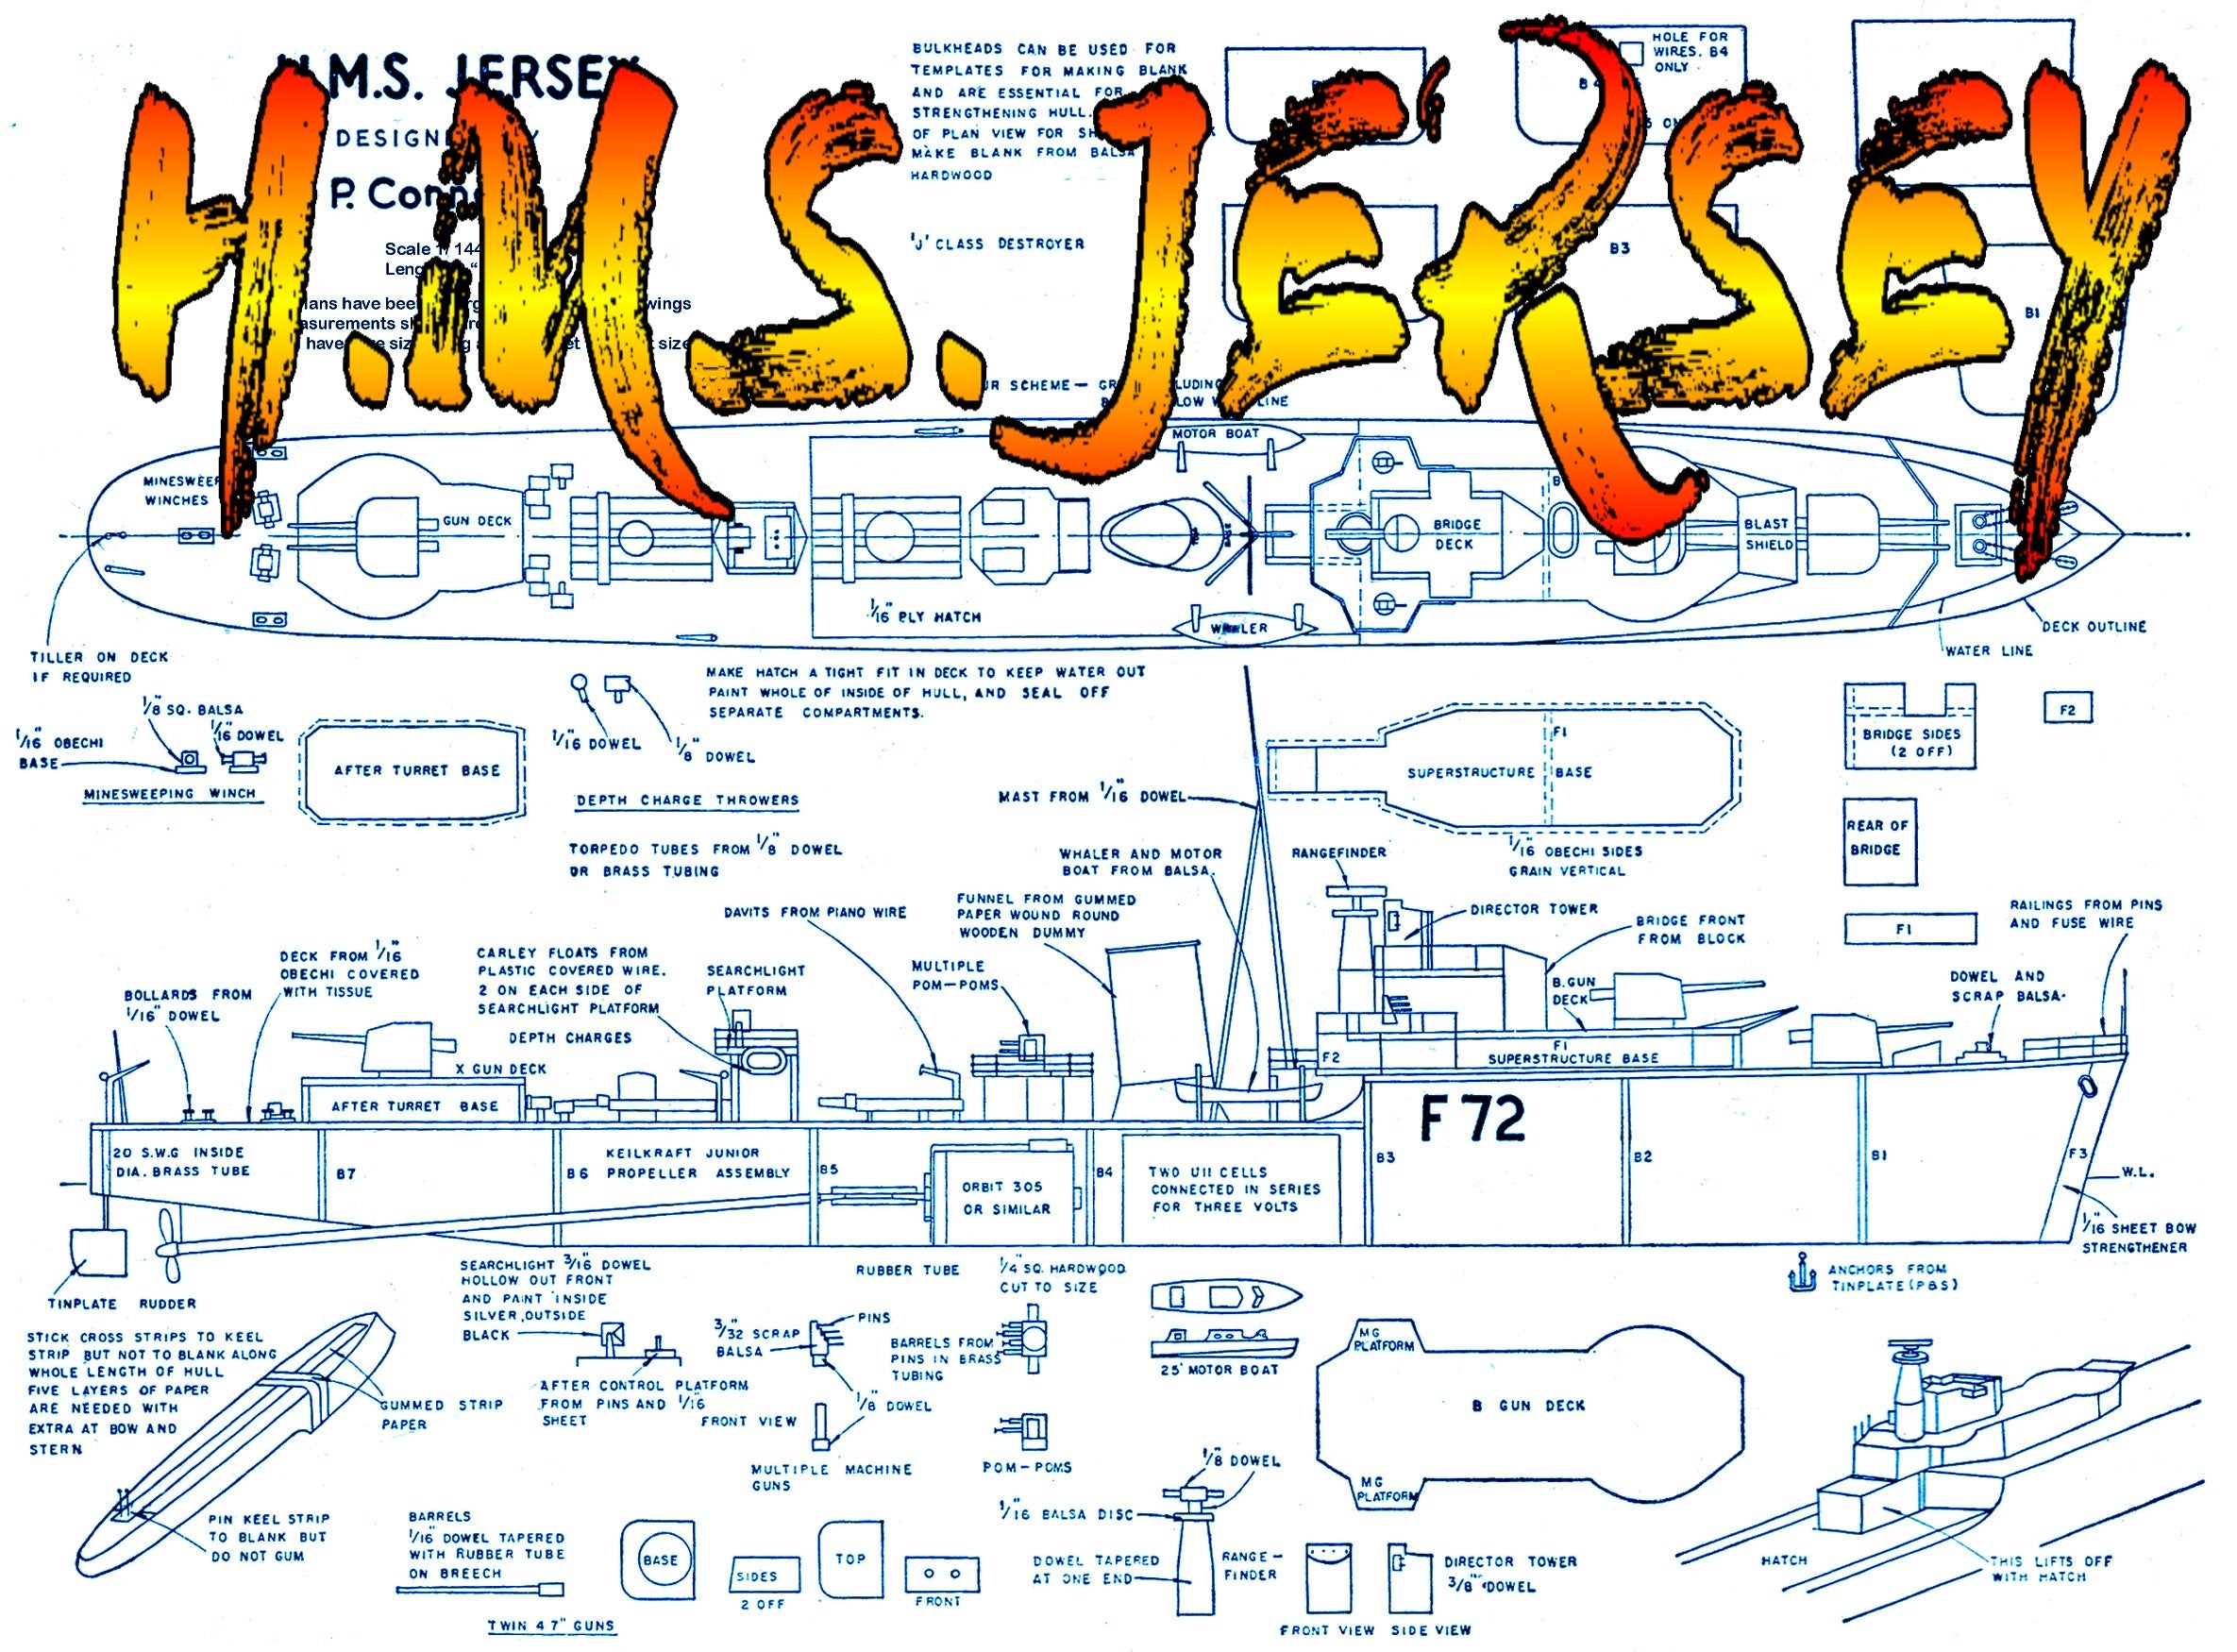 full size printed plans scale 1/144 destroyer h.m.s. jersey l 30" suitable for radio control